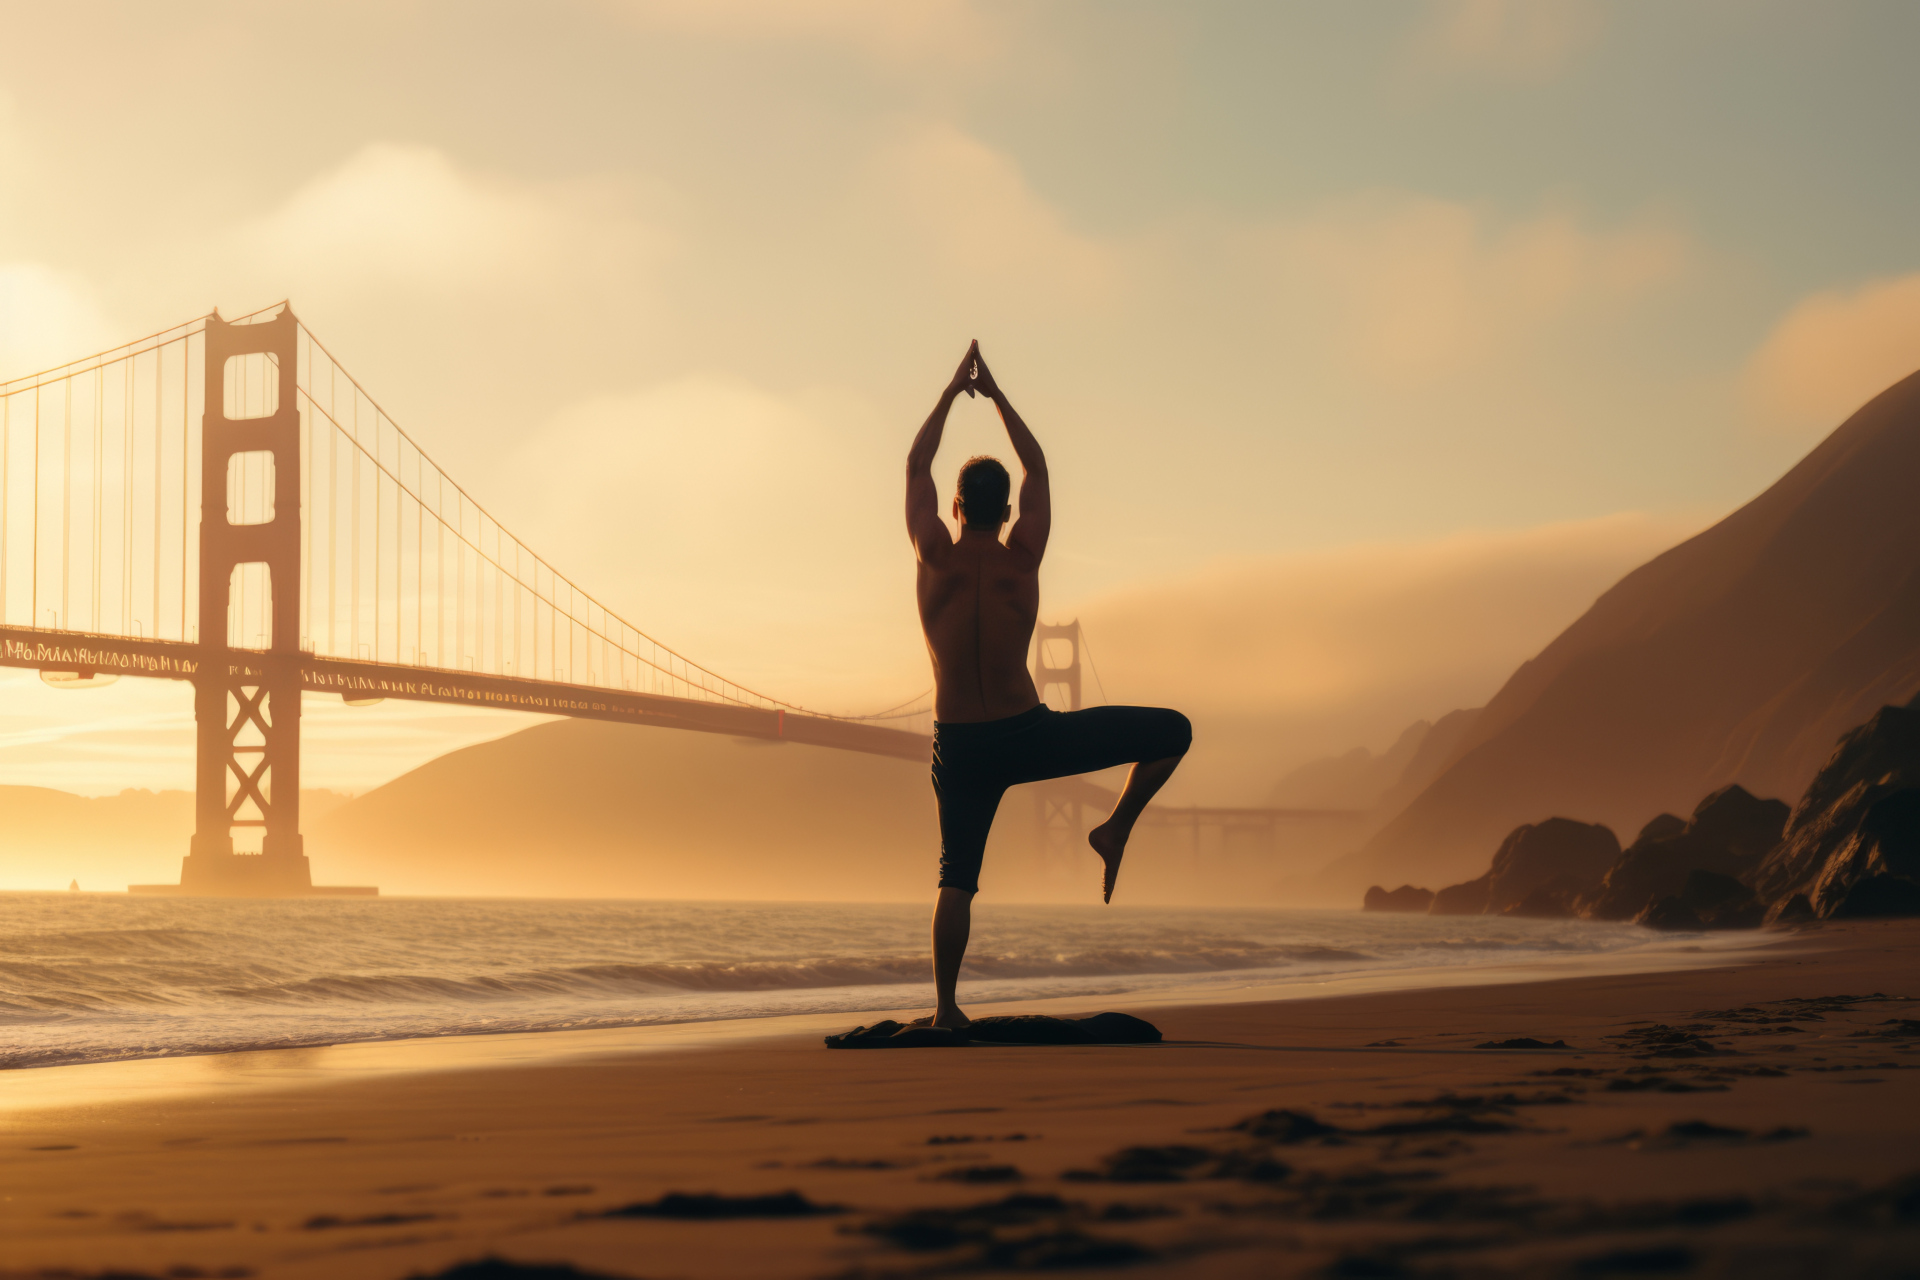 A man practicing yoga on the beach with the Golden Gate Bridge in the background.